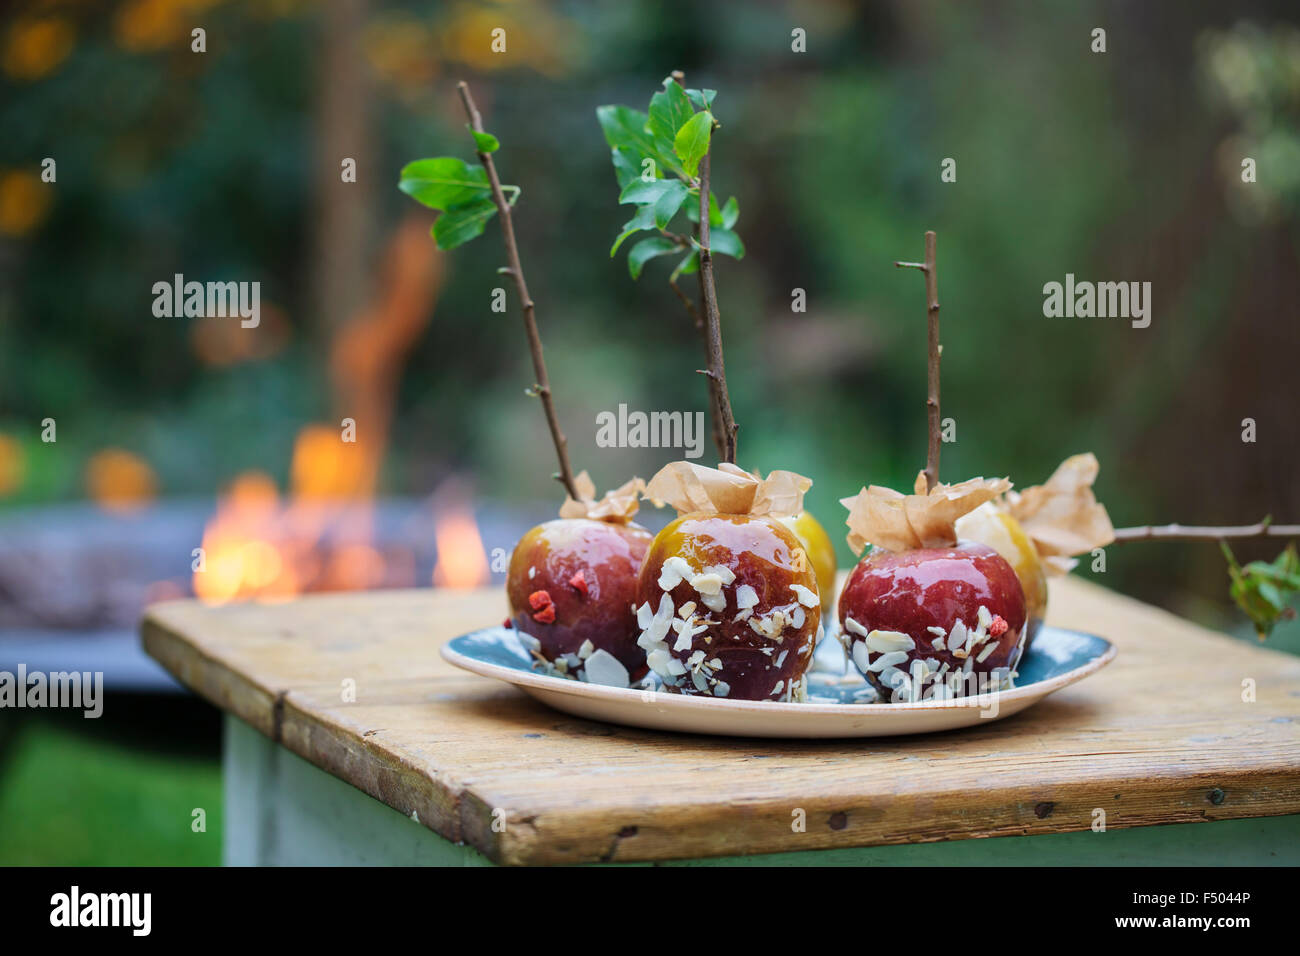 Toffee apples and a bonfire in the background Stock Photo